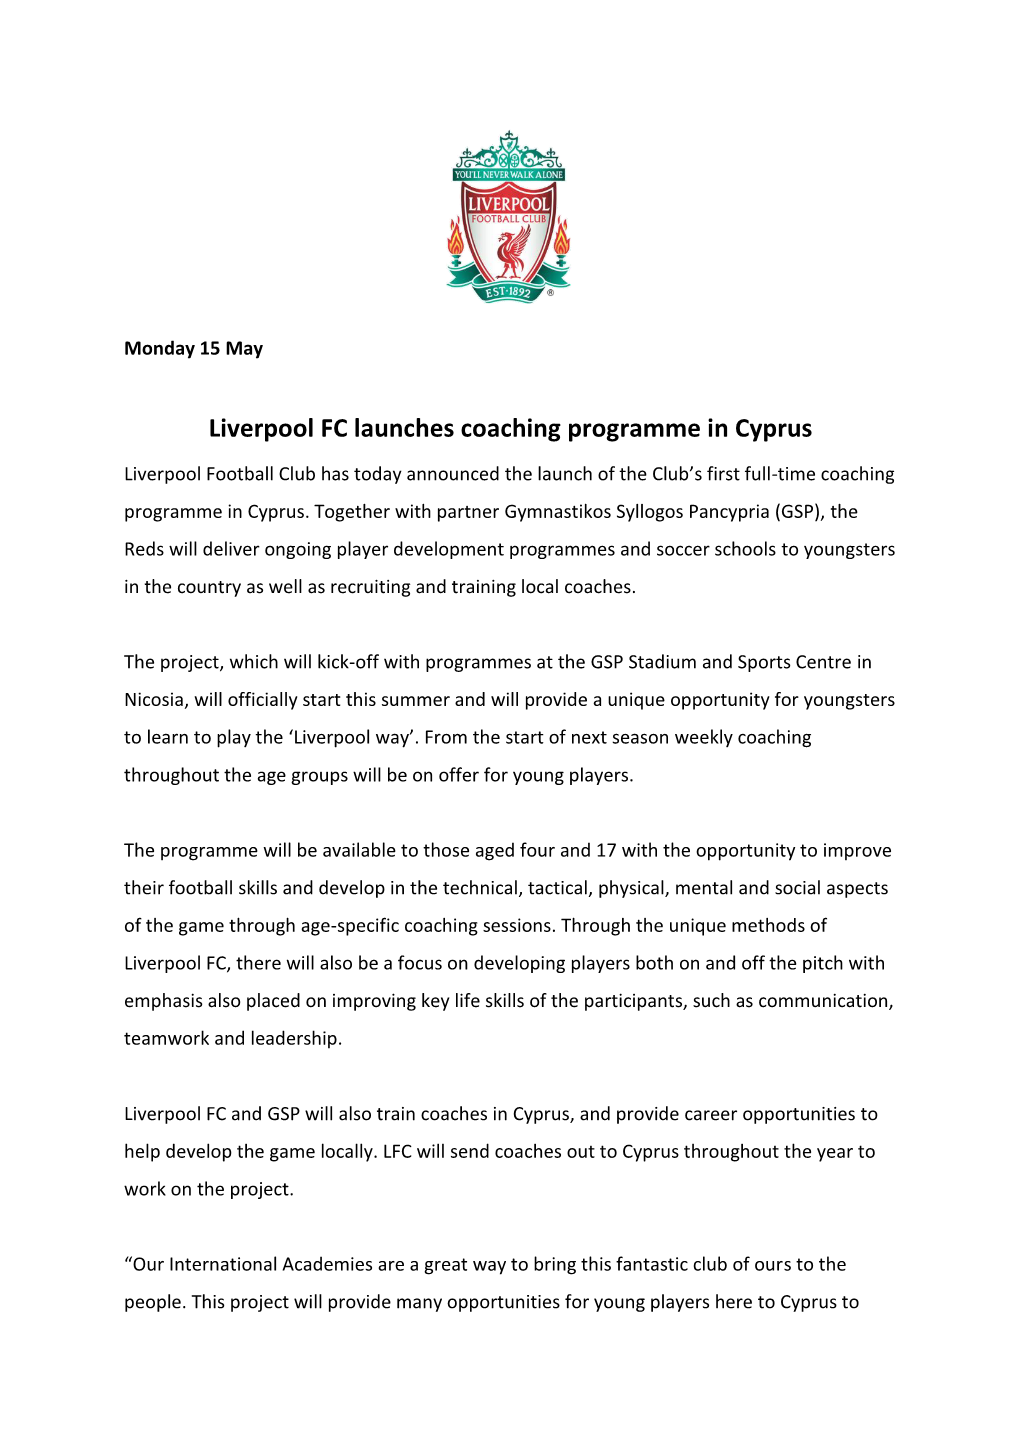 Liverpool FC Launches Coaching Programme in Cyprus